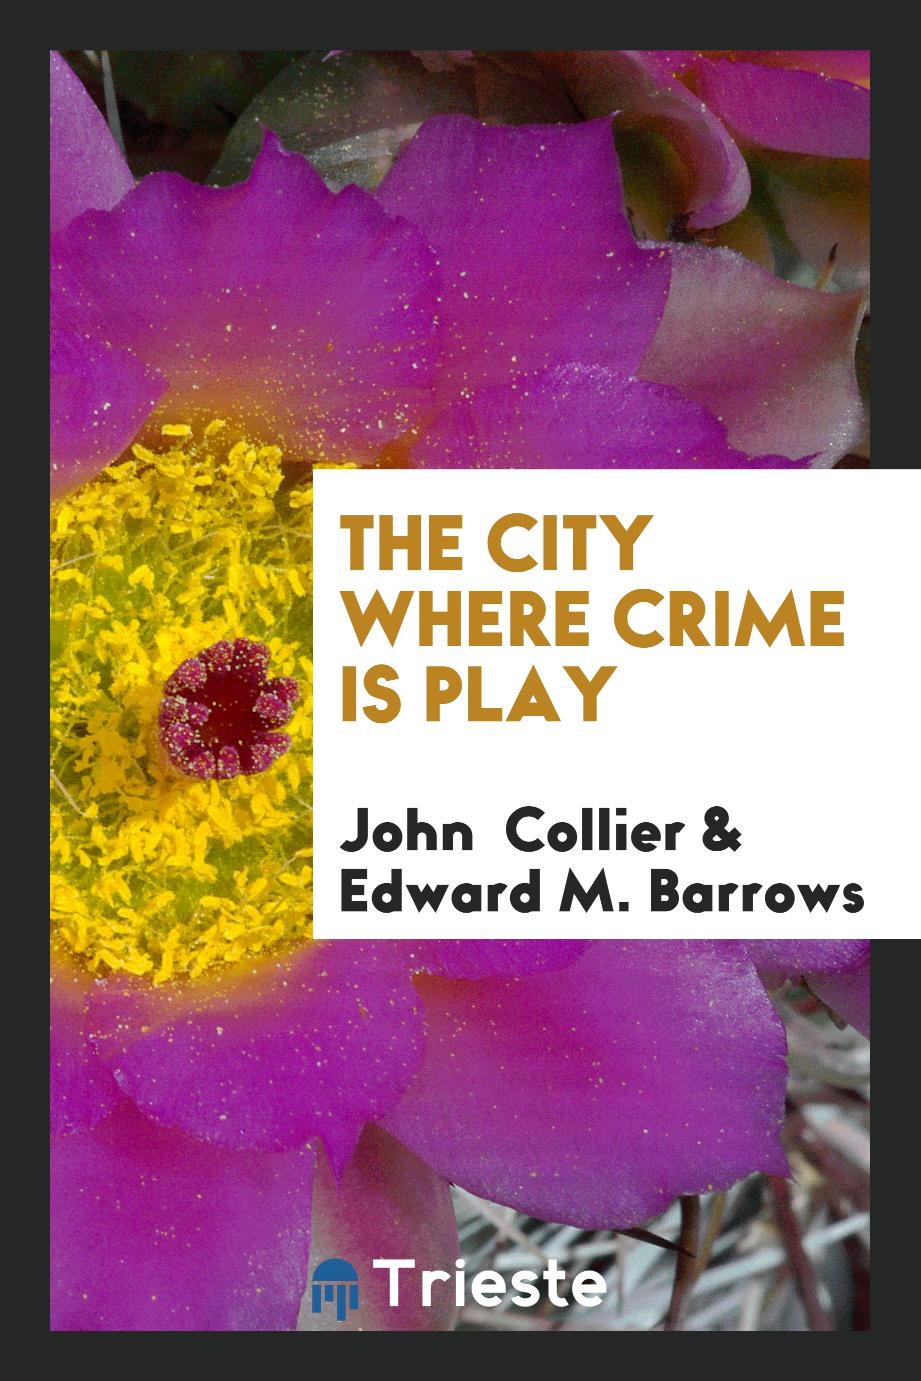 The City where Crime is Play